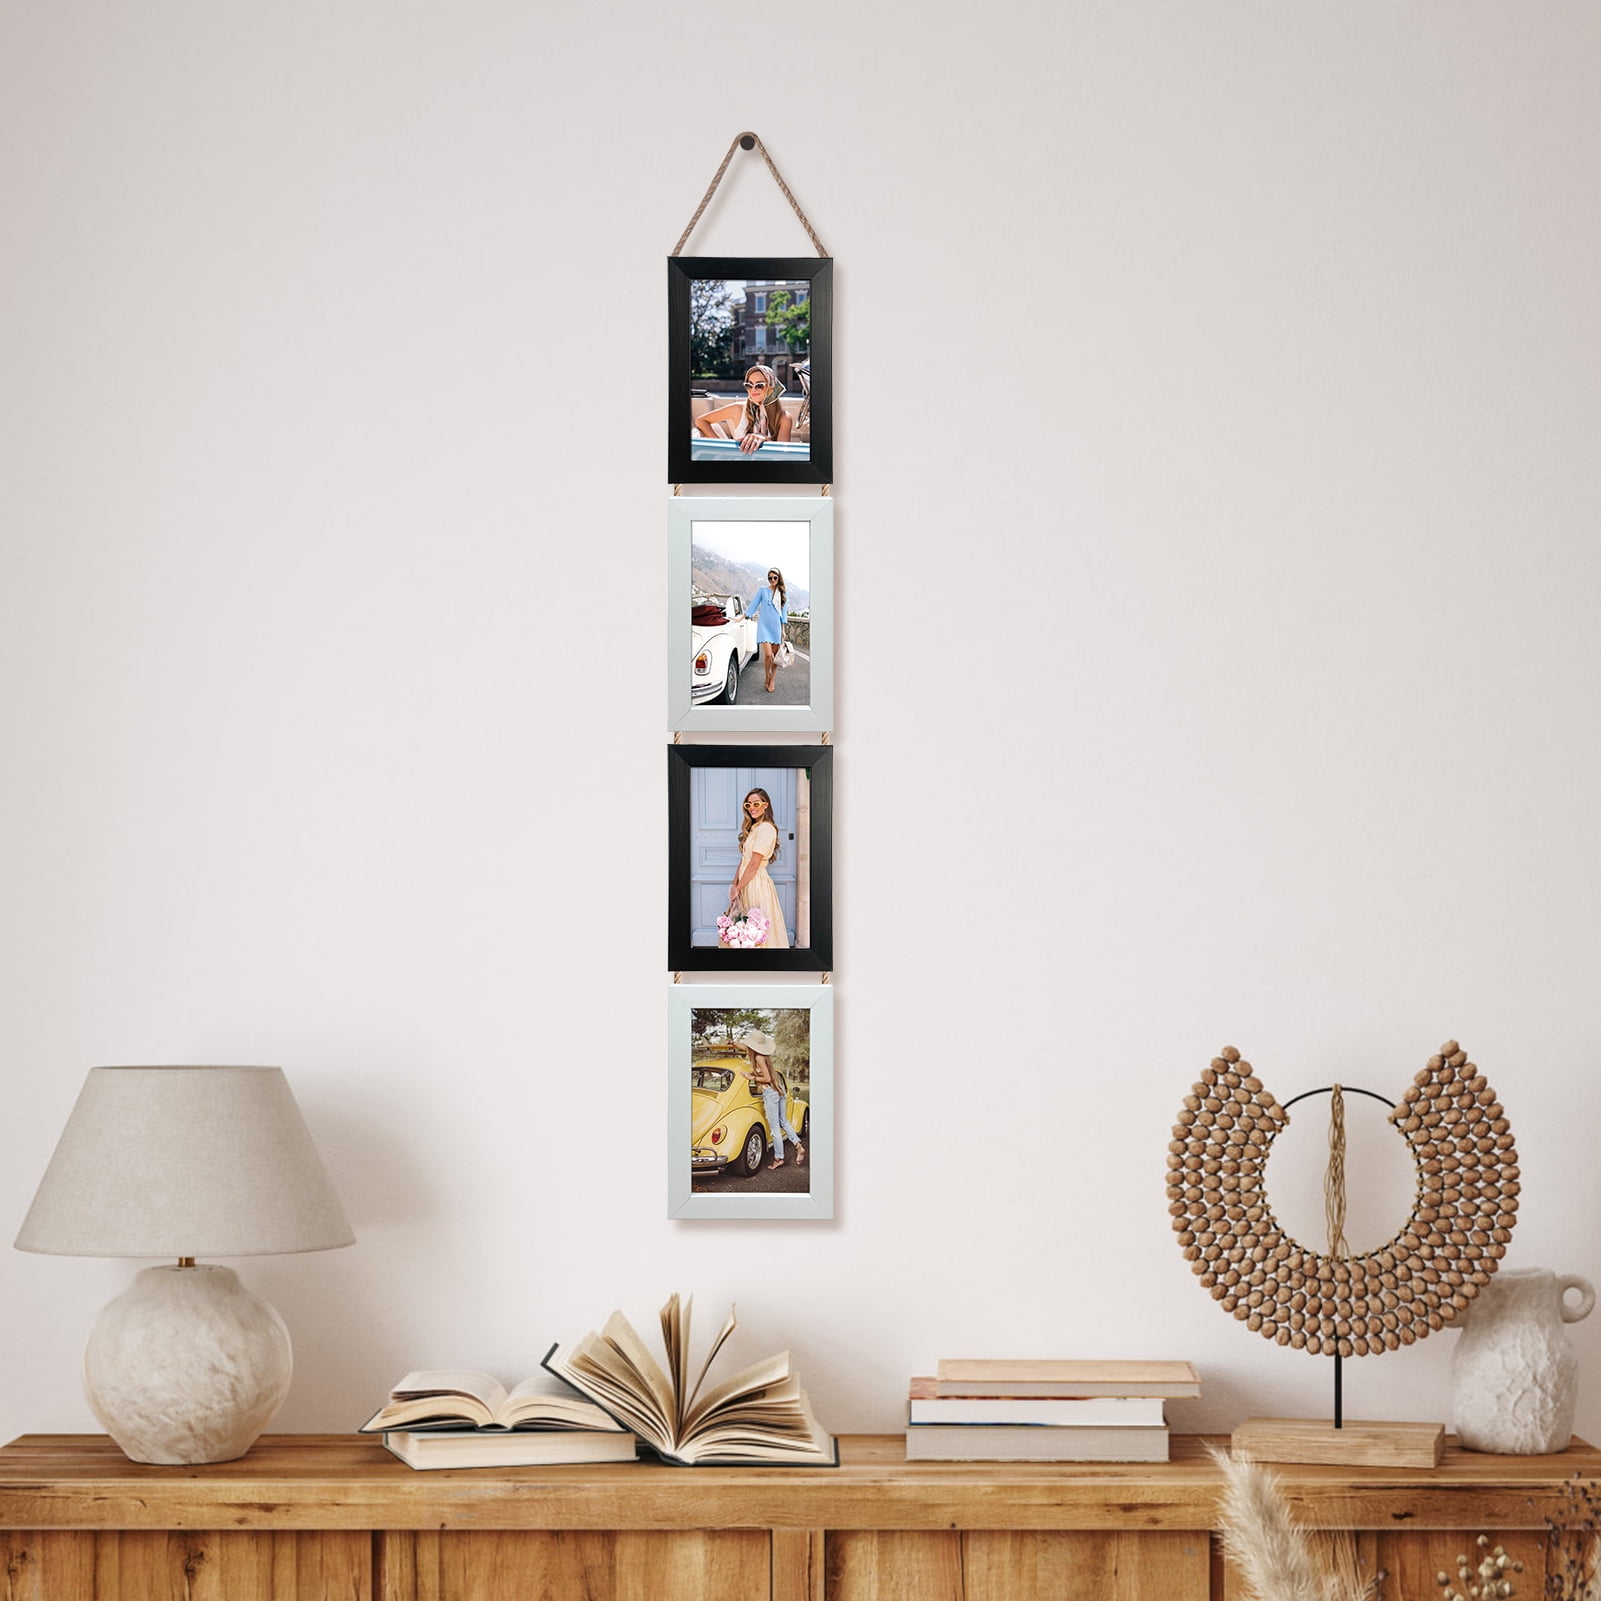 2x 4x6 Picture Frame for Art Black Photo Frames Wall Hanging